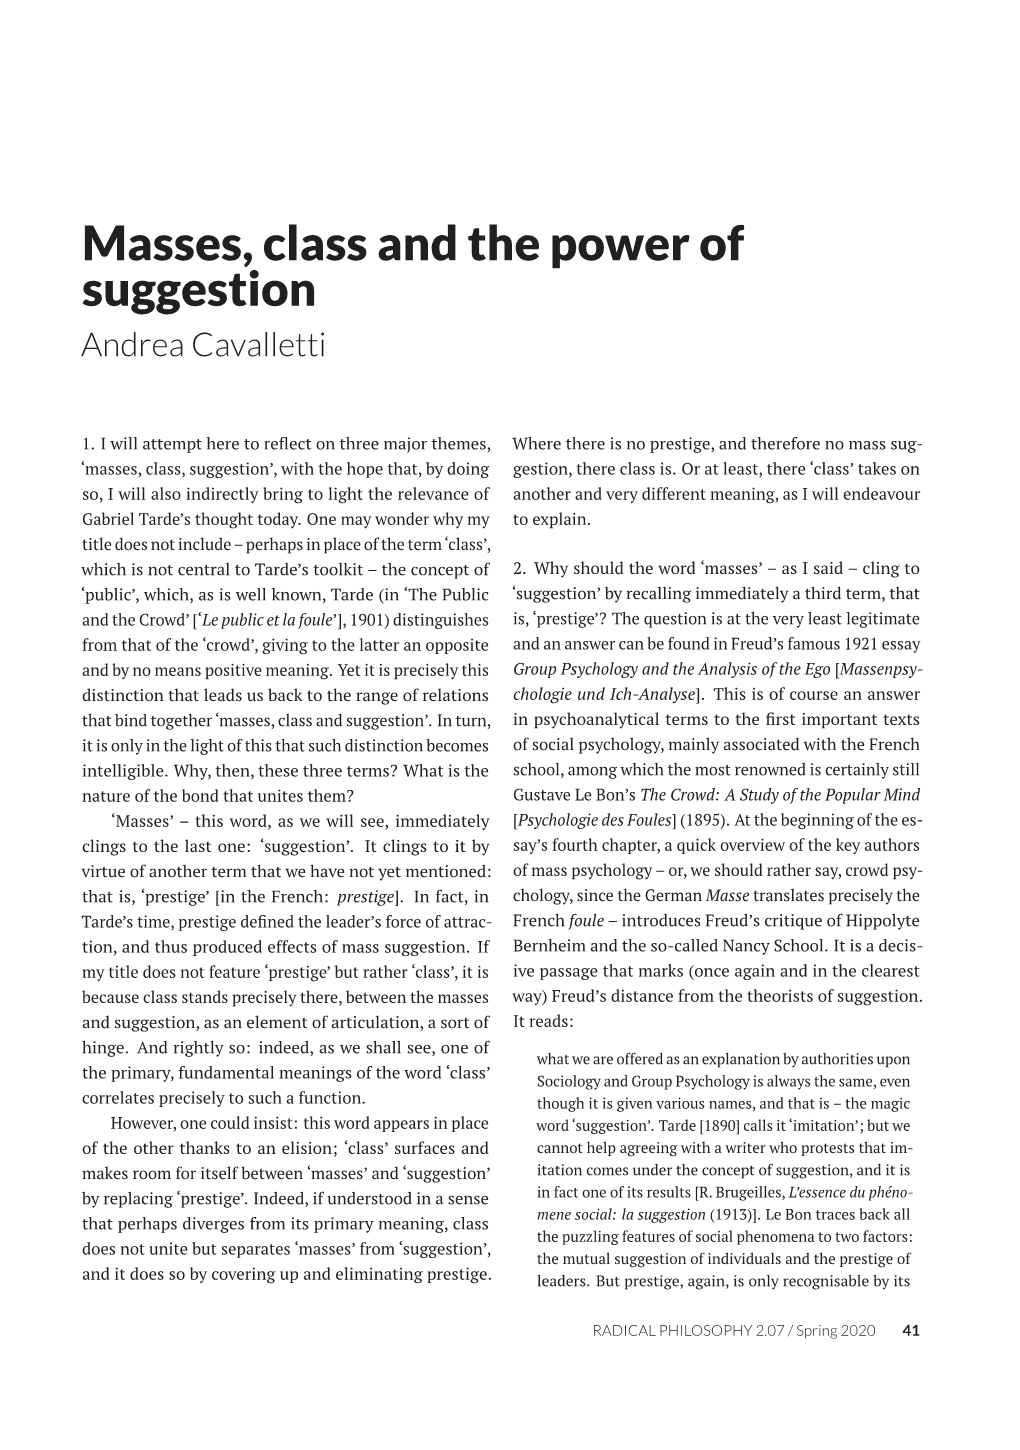 Masses, Class and the Power of Suggestion Andrea Cavalletti